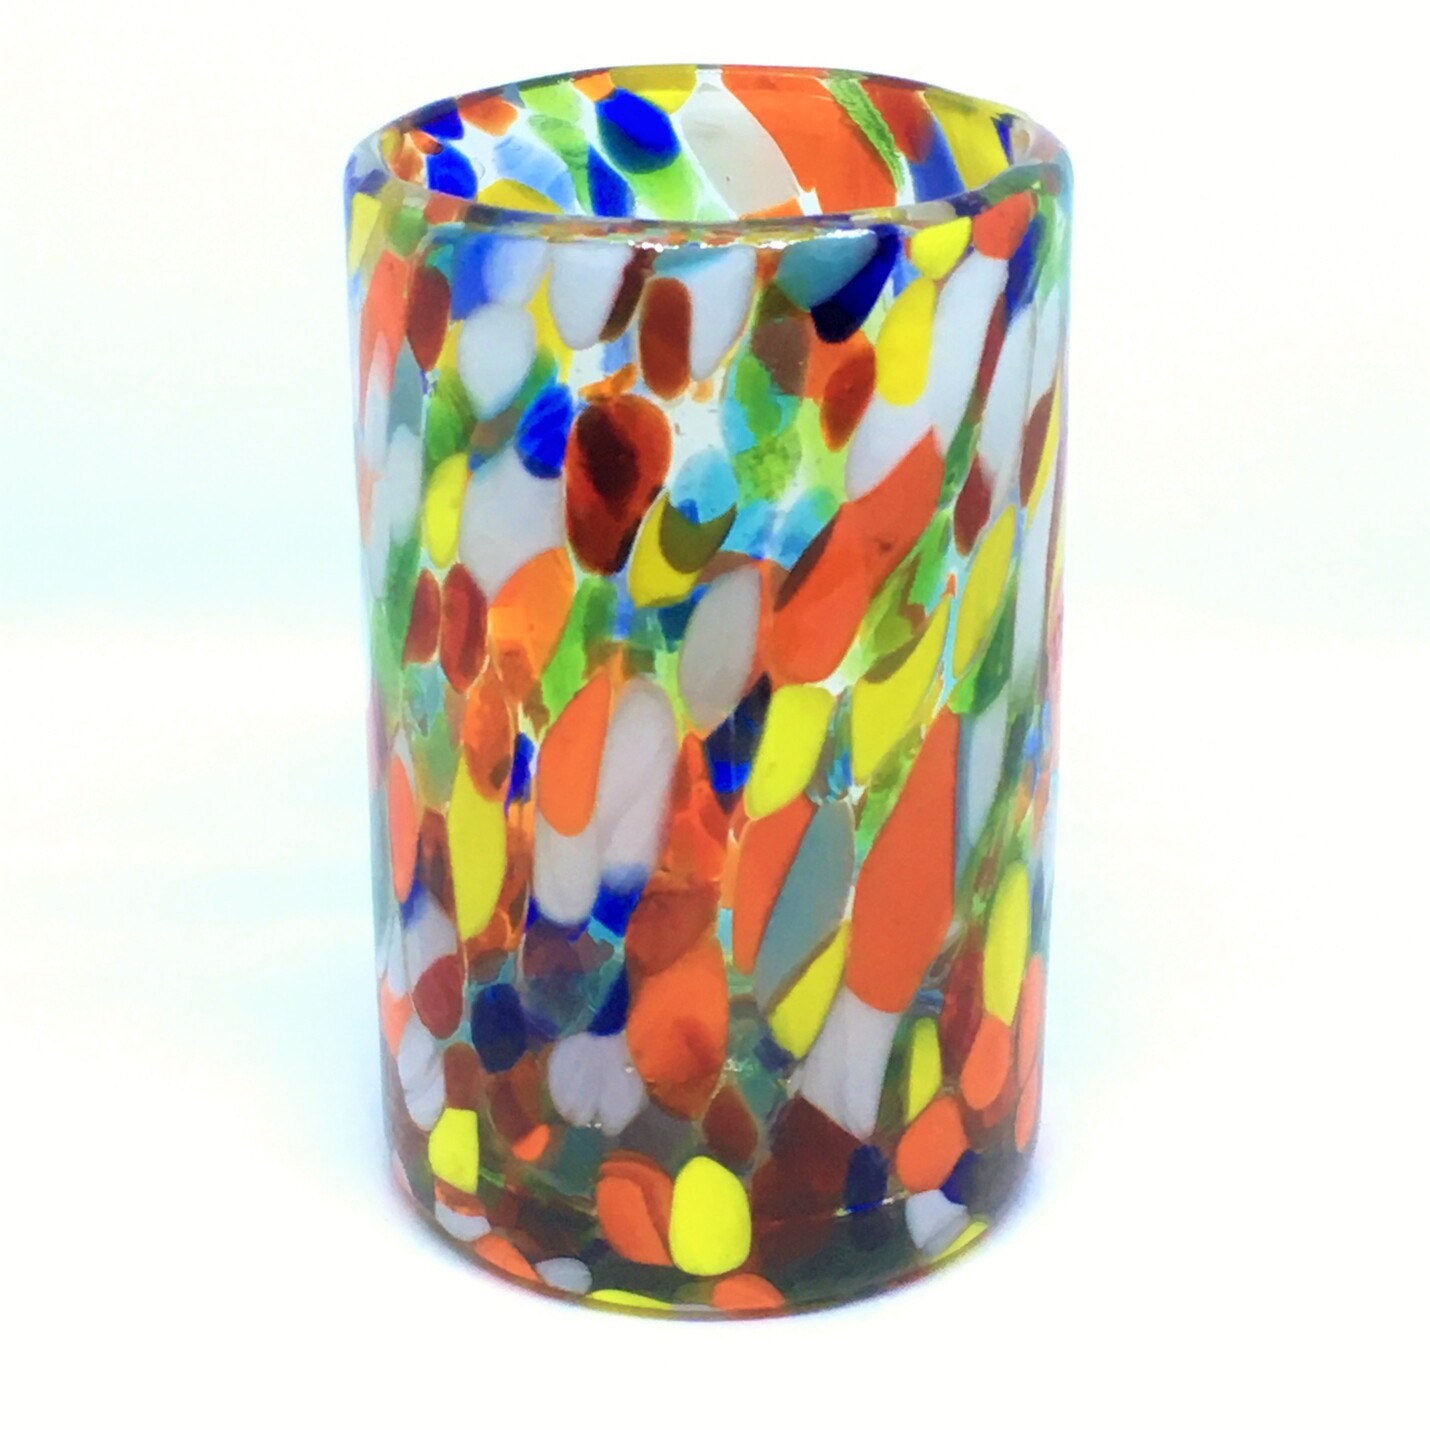 Mexican Glasses / Confetti Carnival drinking glasses (set of 6) / Let the spring come into your home with this colorful set of glasses. The multicolor glass decoration makes them a standout in any place.